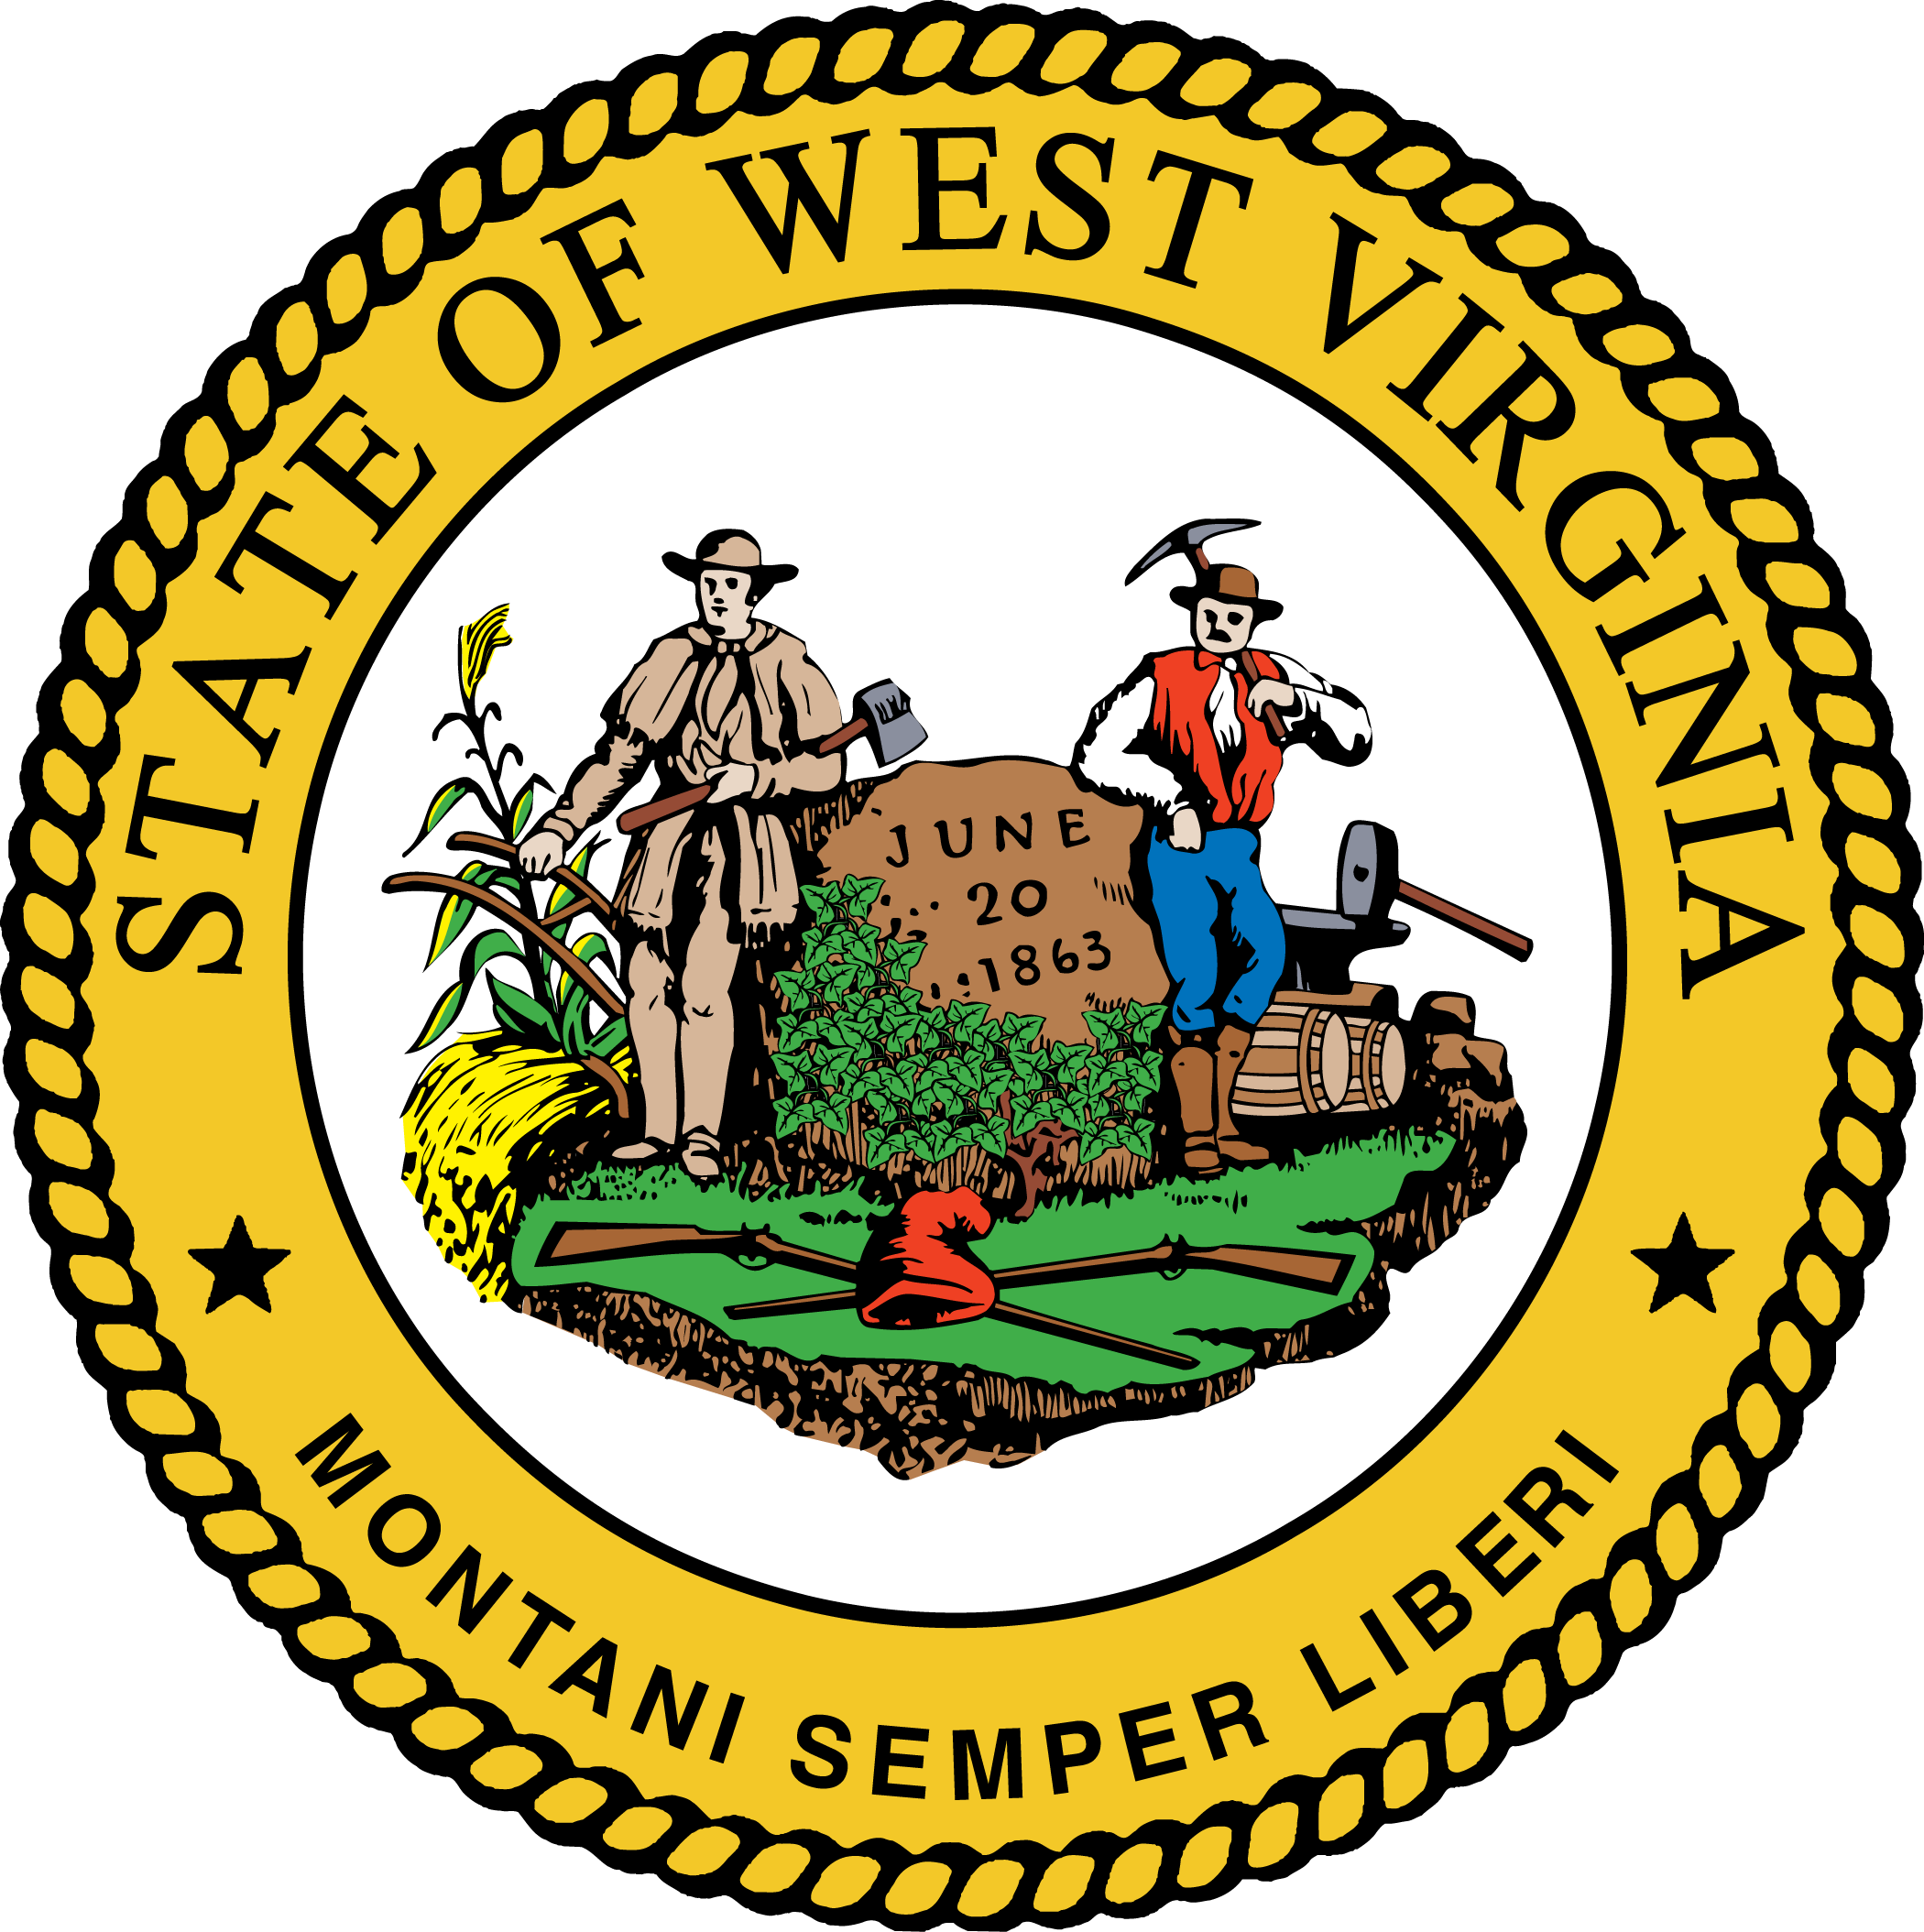 The Great Seal of West Virginia